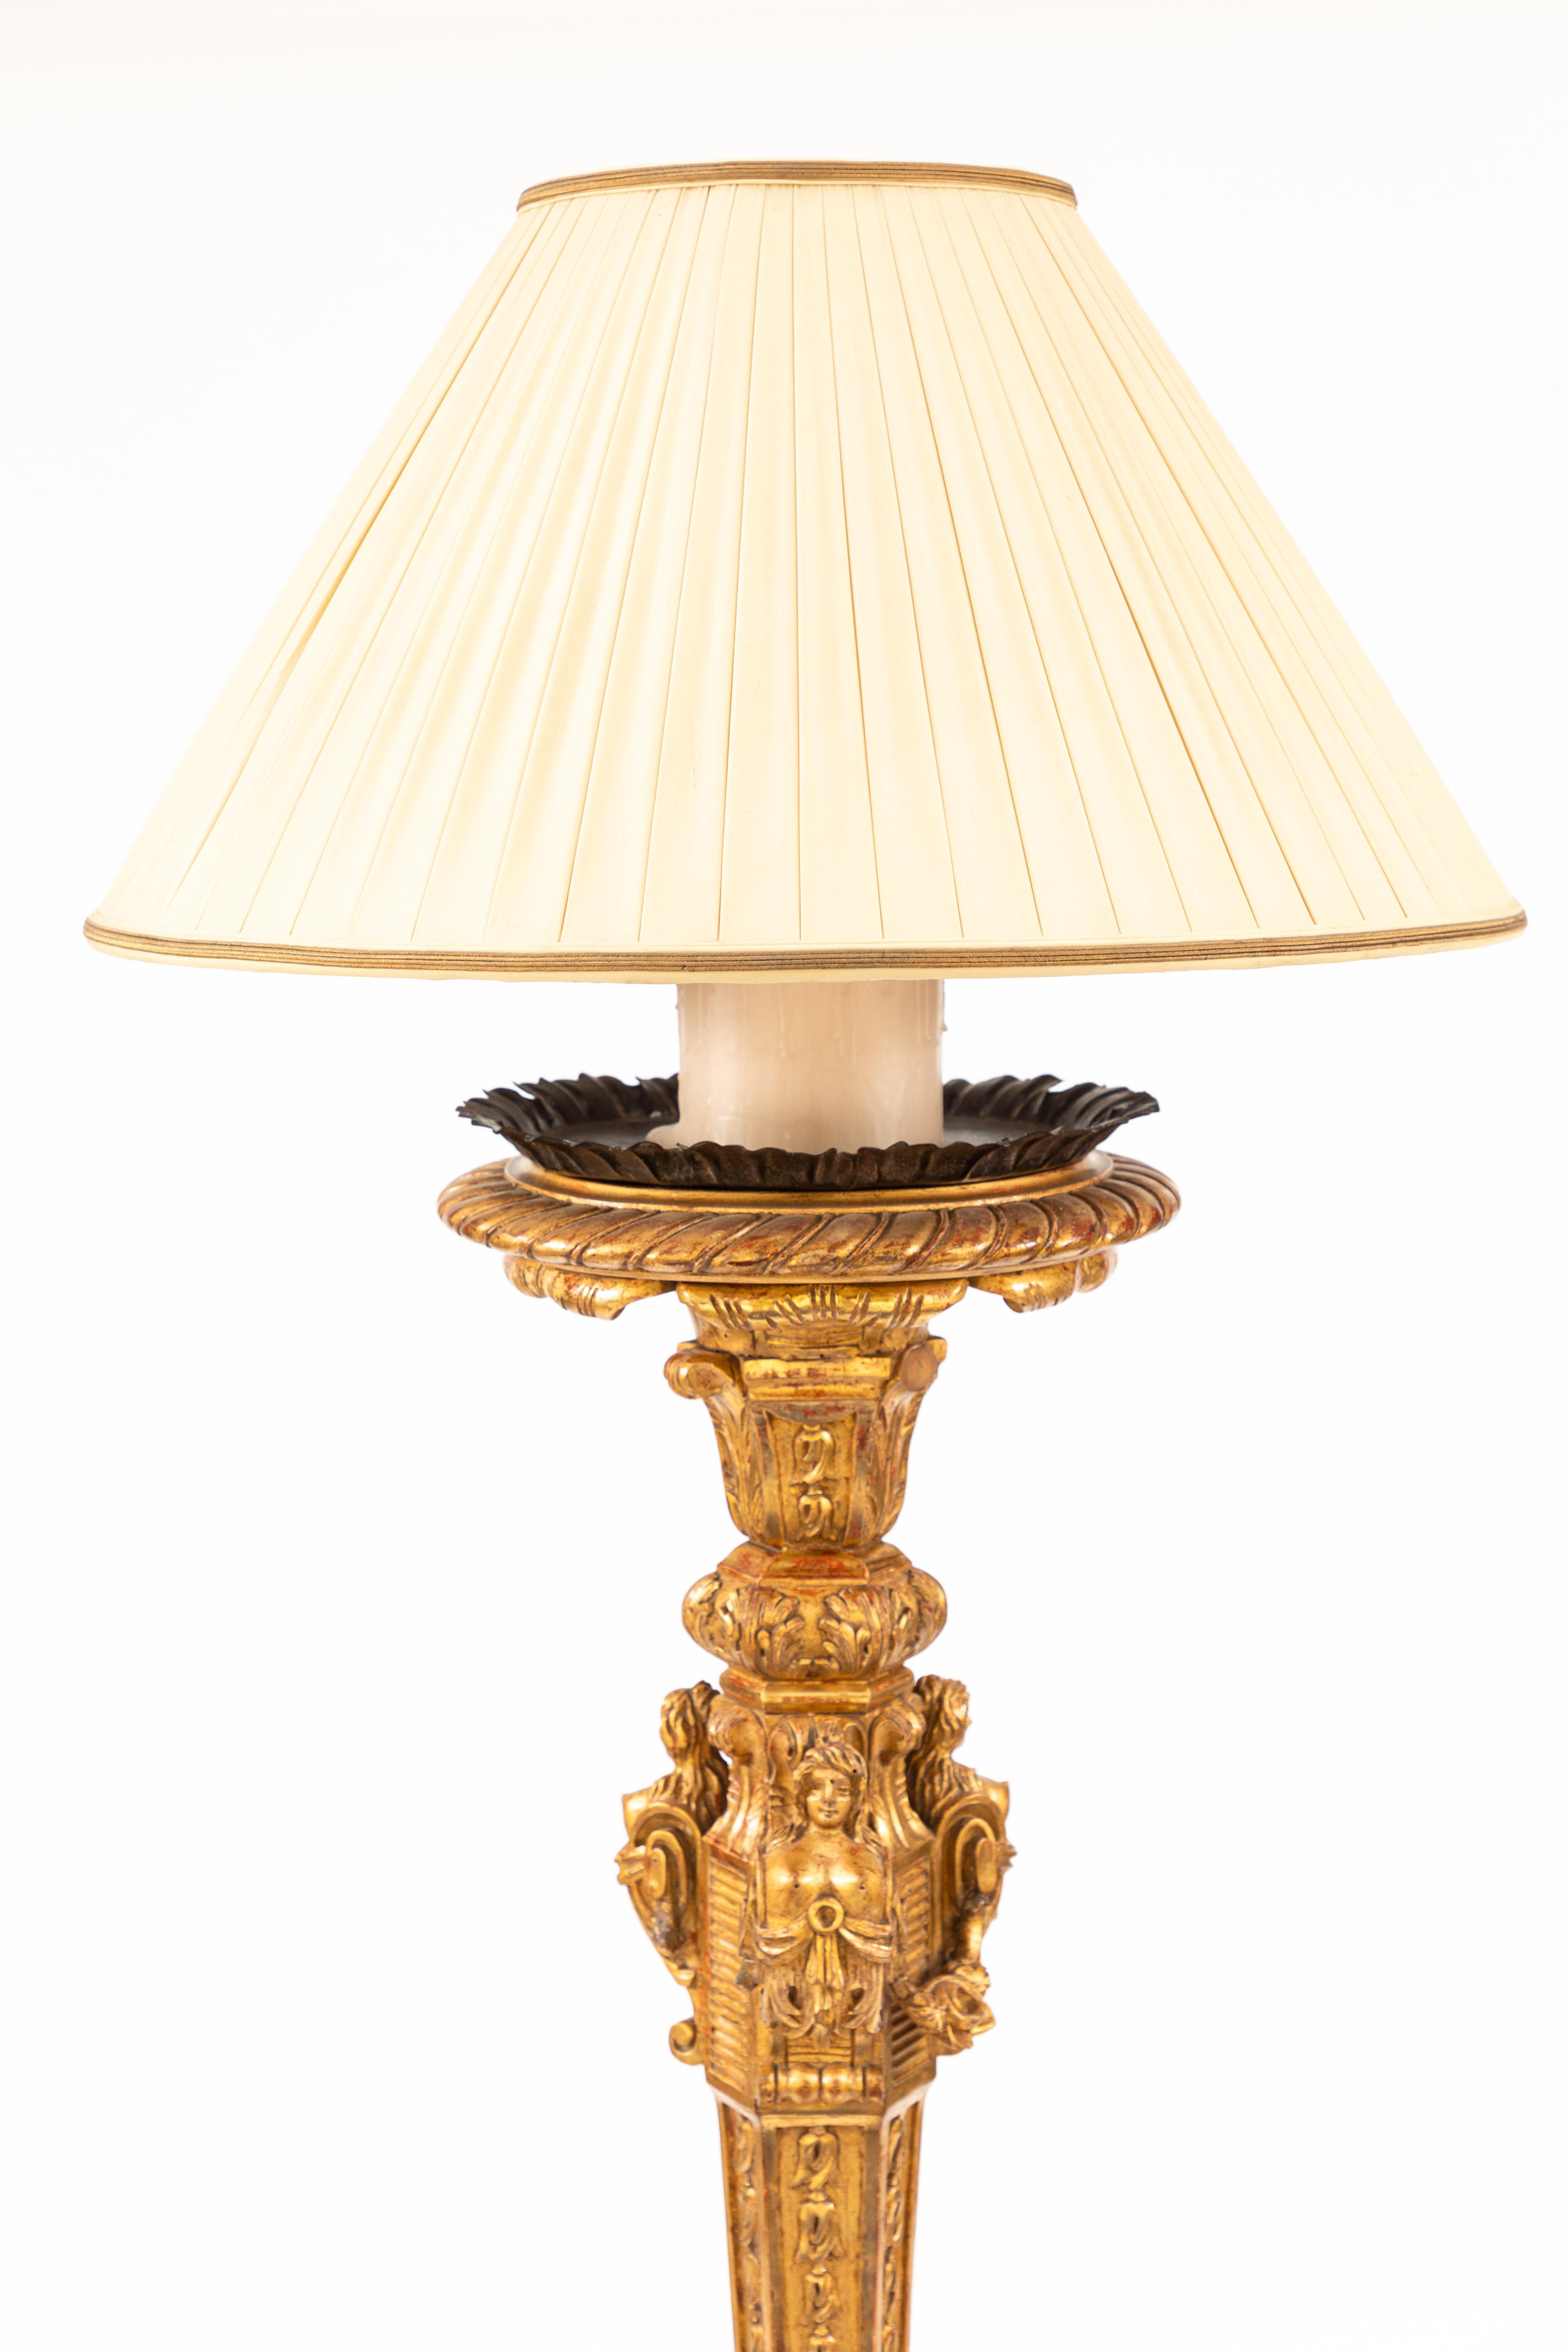 19th century French giltwood floor lamp. Finely details throughout. Newly wired.